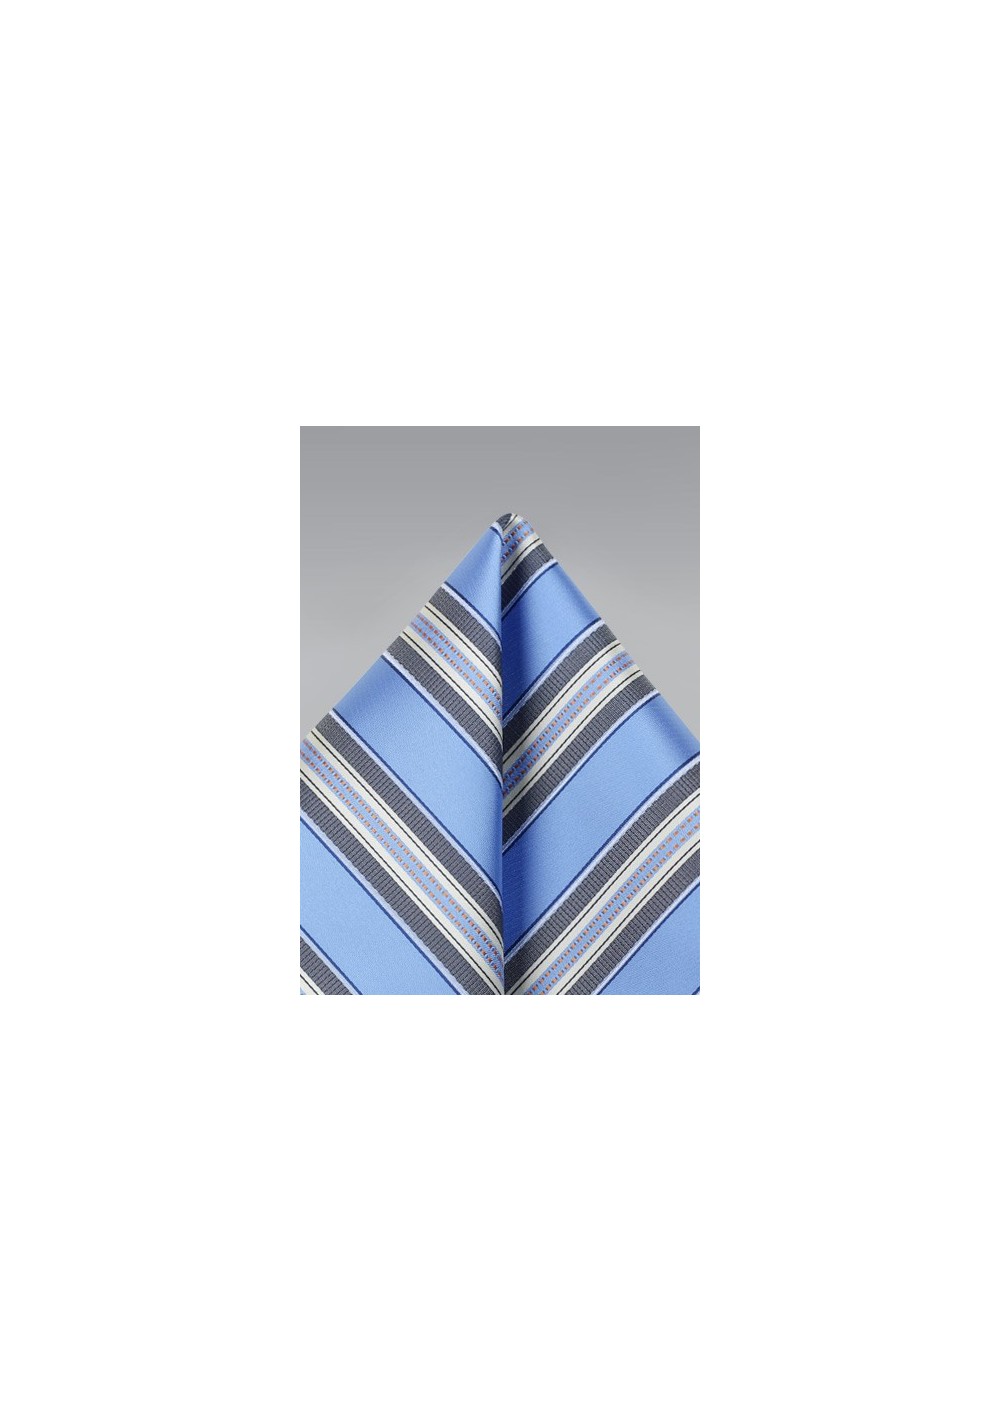 Striped Pocket Square in Blue and Gray